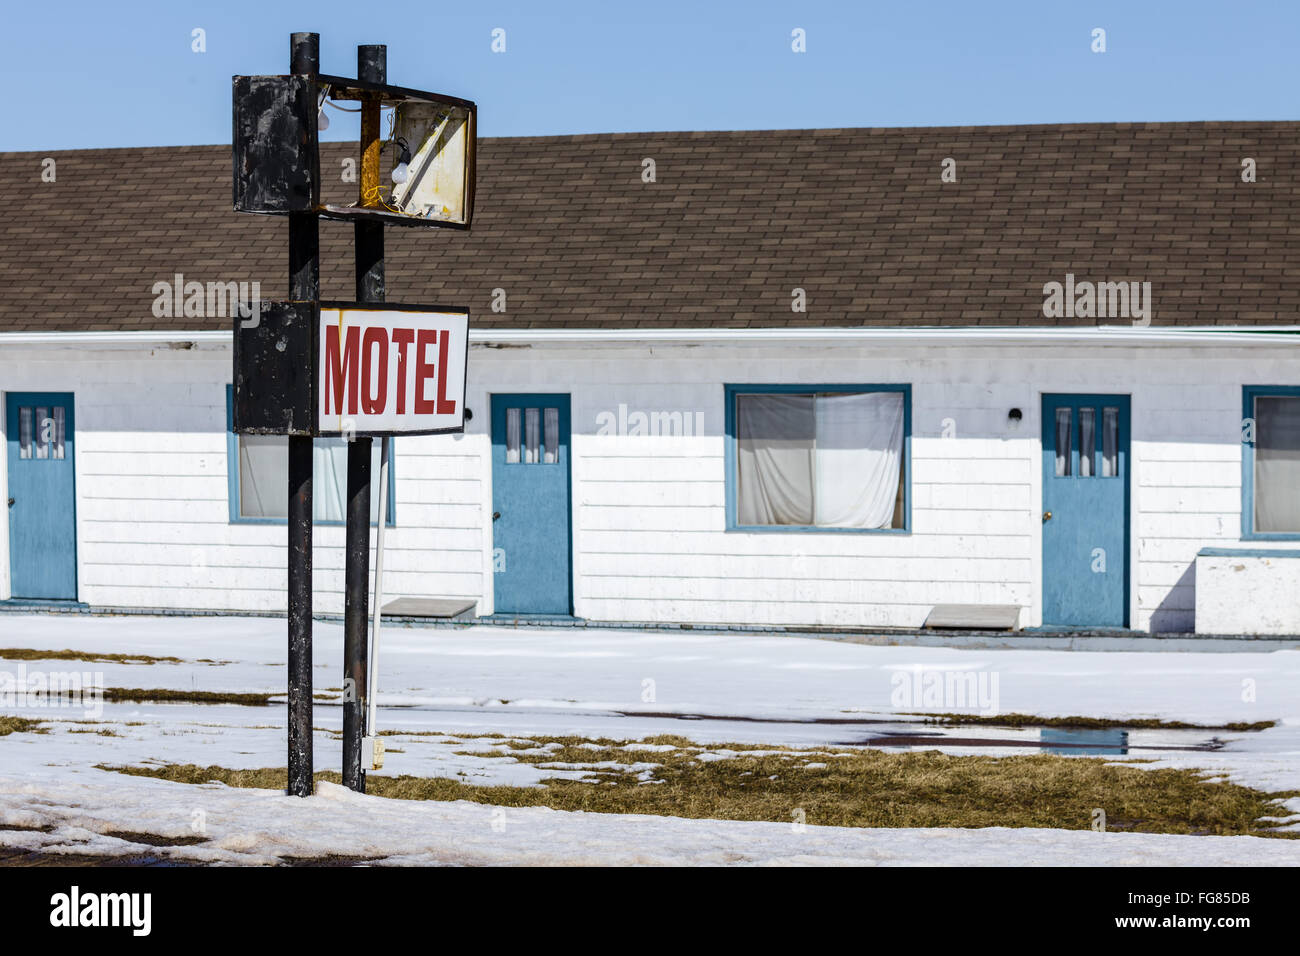 An old abandoned North American motel. Stock Photo